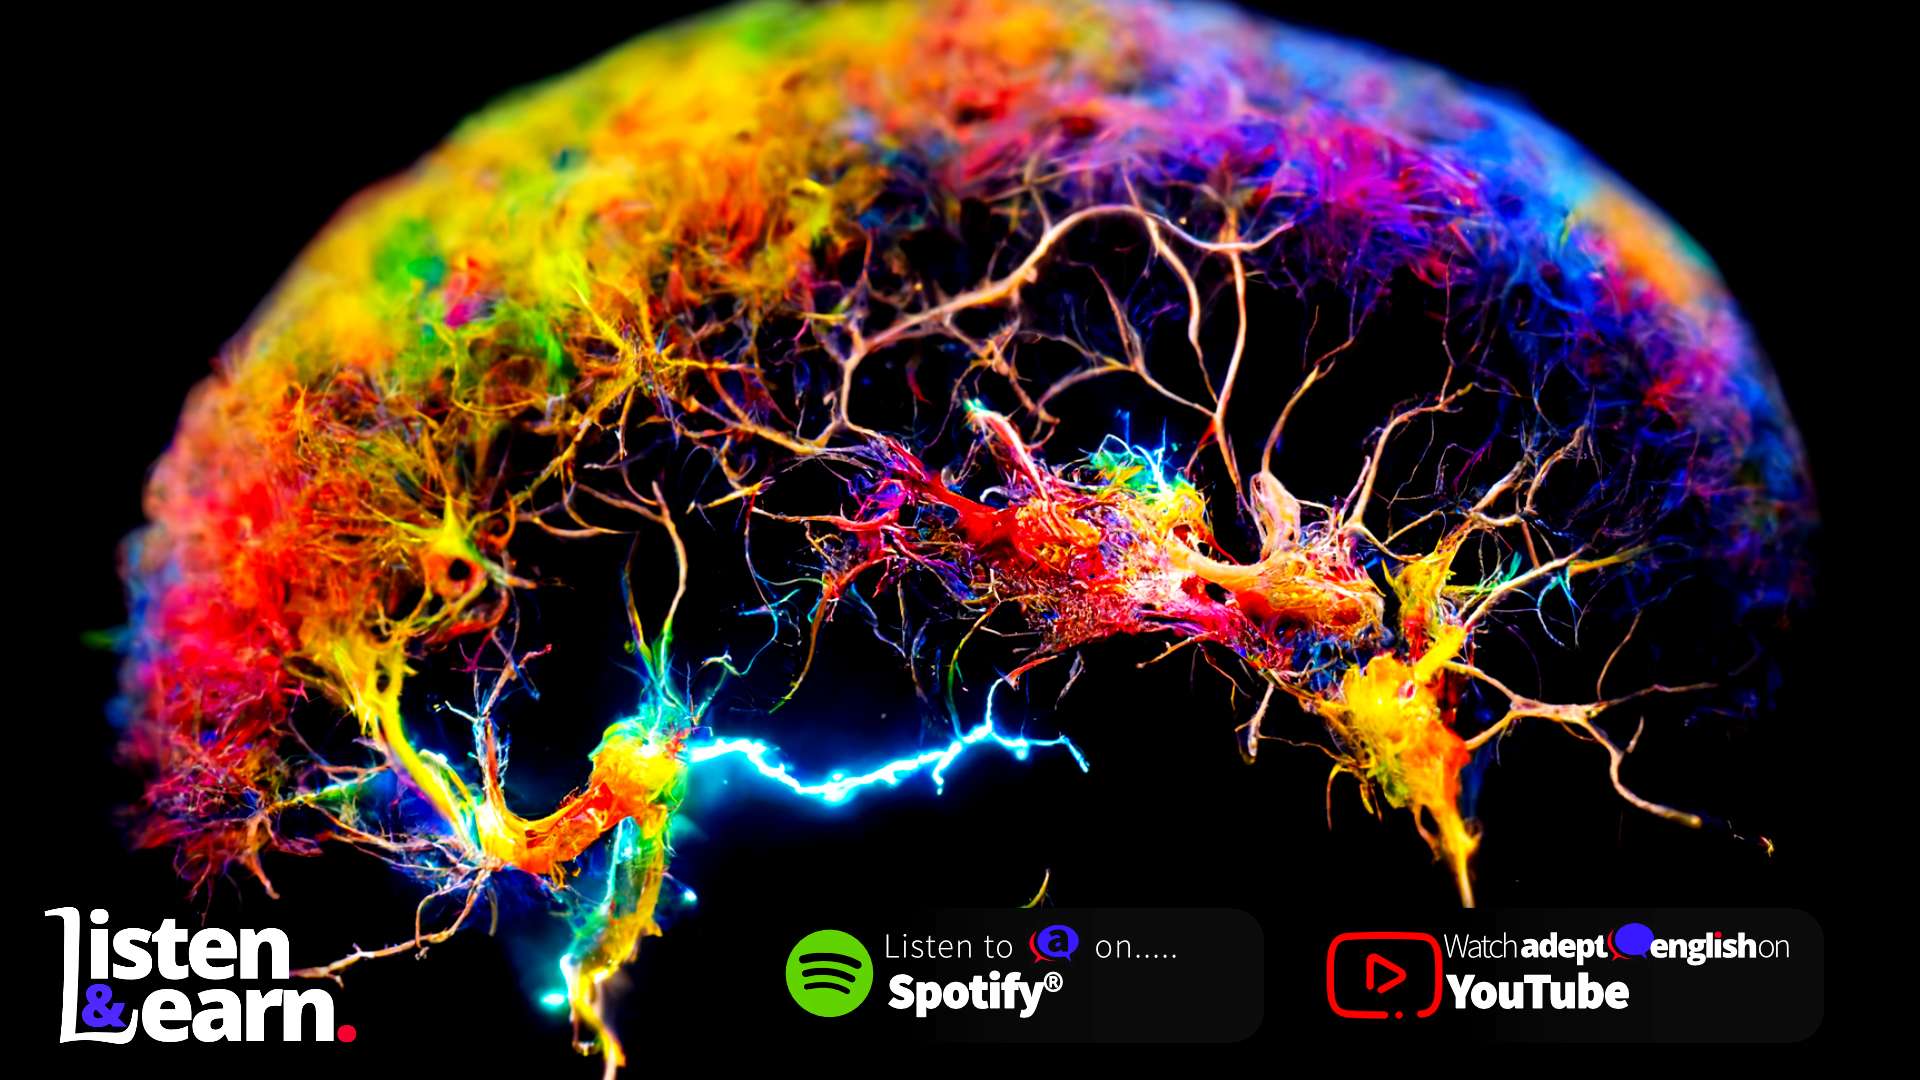 Graphic art depicting a neuron firing in a human brain. Study English online listening to great English audio lessons all of which come with full transcripts.